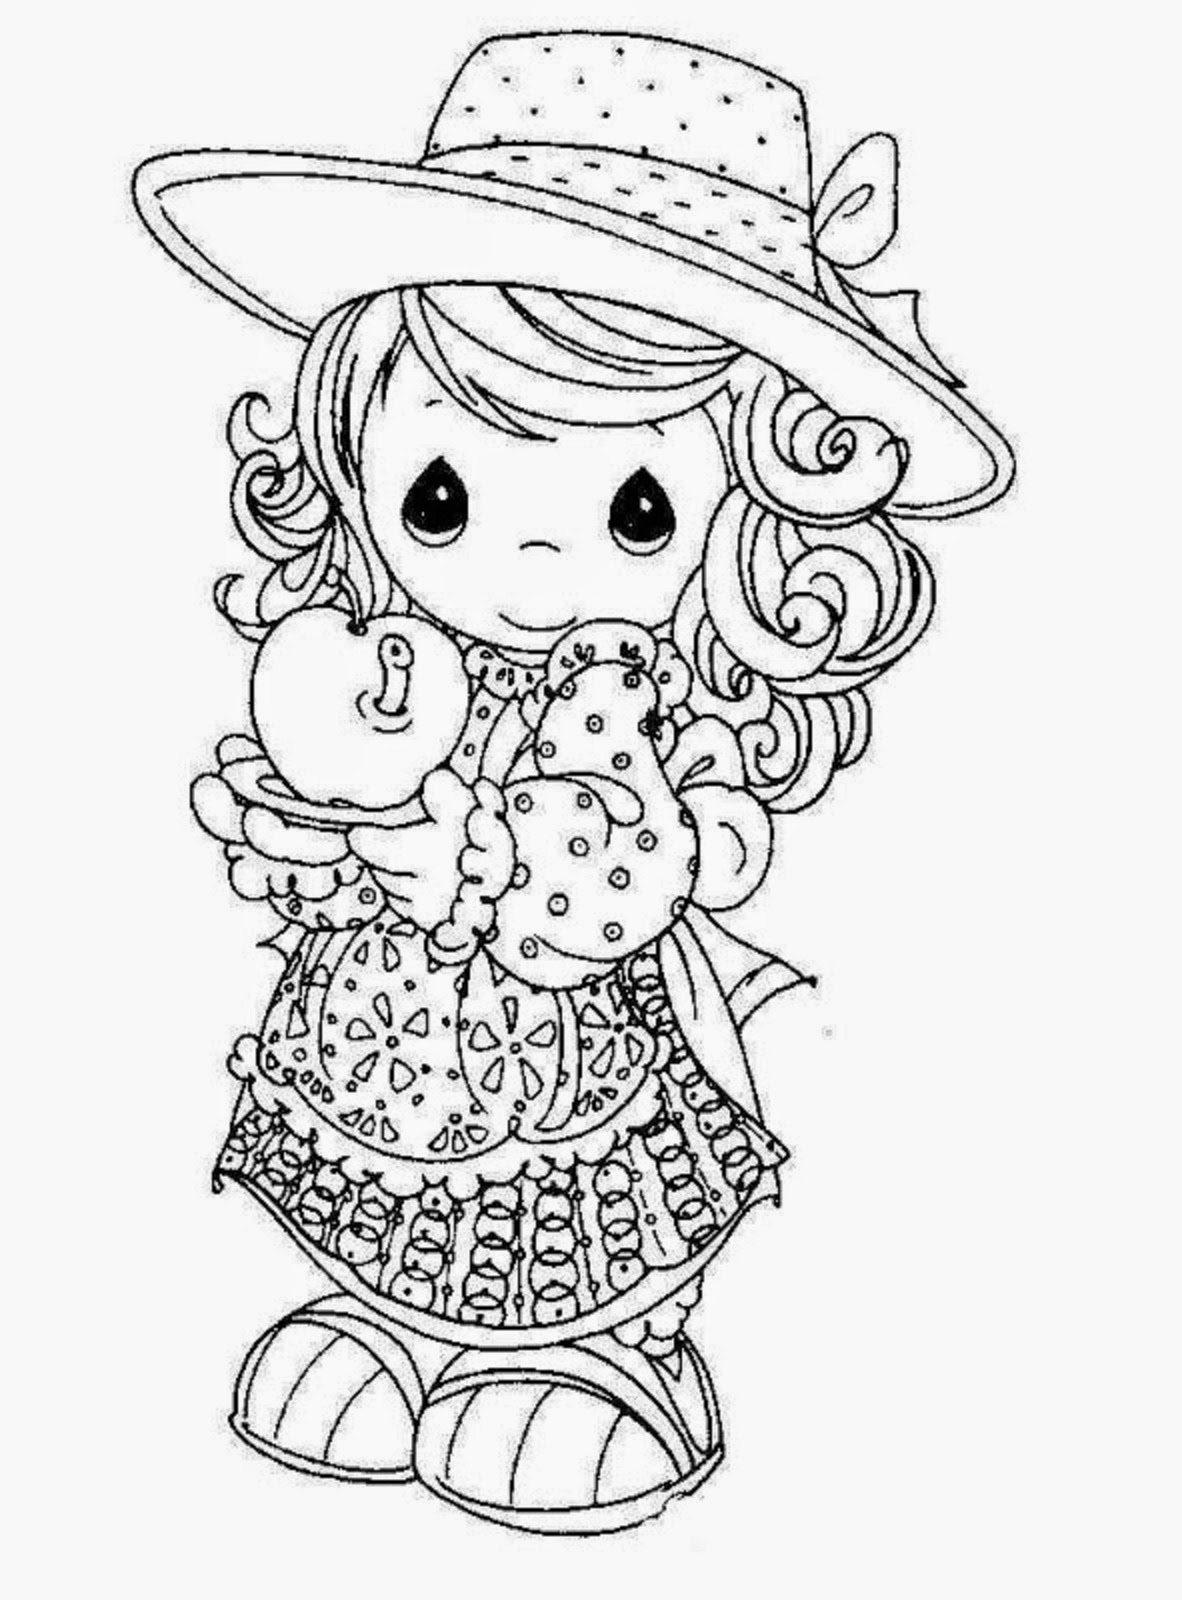 Download colours drawing wallpaper: Beautiful Princess Doll Coloring Page for Kids of a Cute Cartoon ...